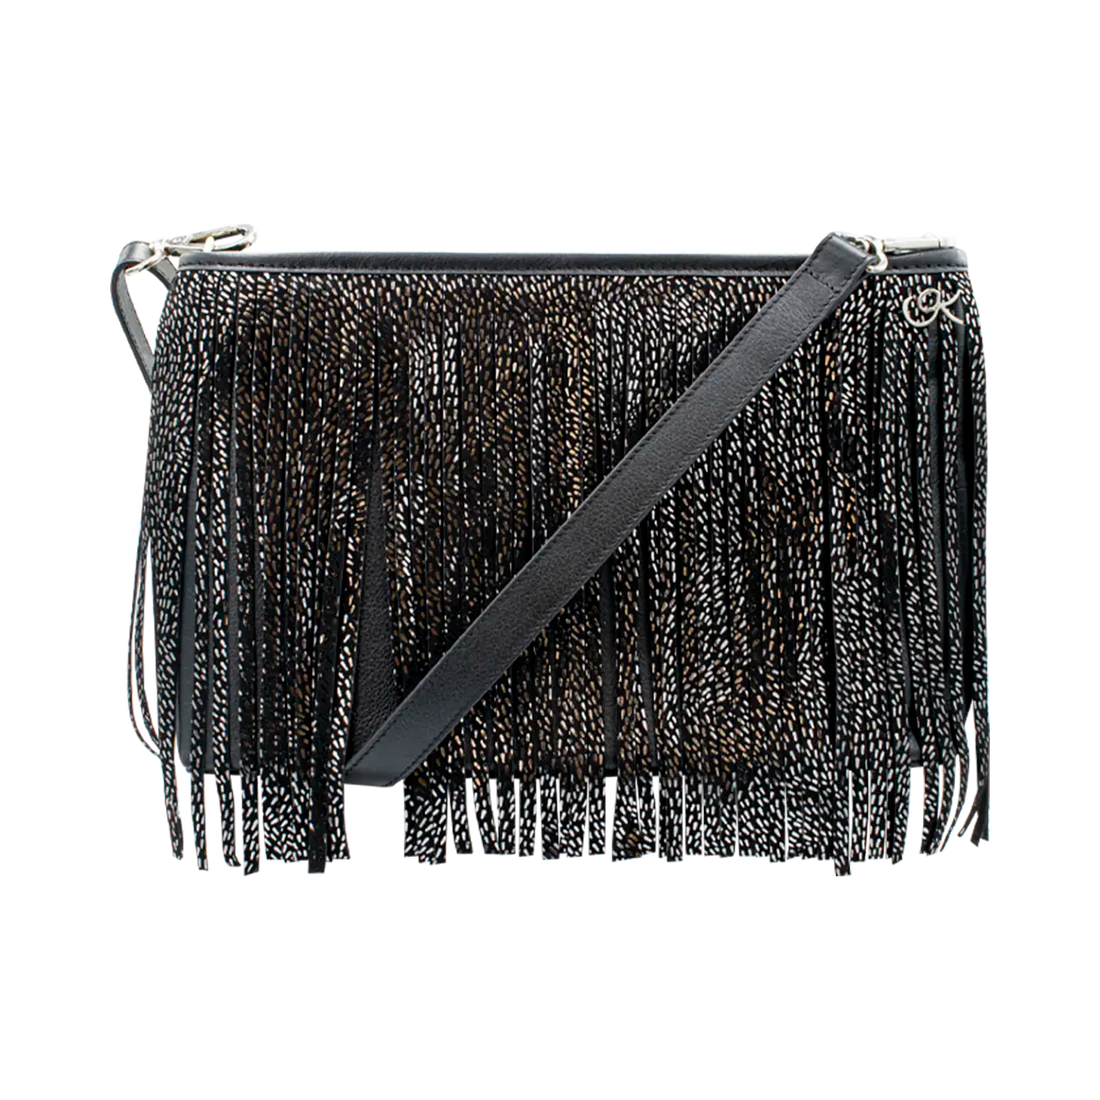 black silver stripe small black leather crossbody bag with fringe. Fashion accessory for women in San Diego, CA.